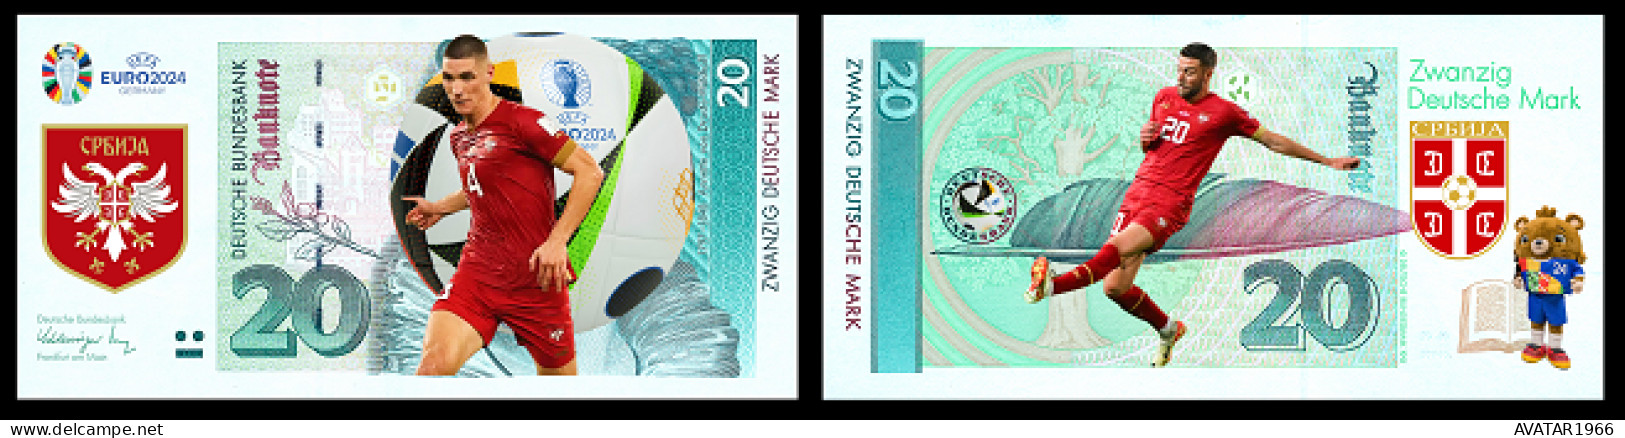 UEFA European Football Championship 2024 Qualified Country Serbia  8 Pieces Germany Fantasy Paper Money - [15] Commémoratifs & Emissions Spéciales